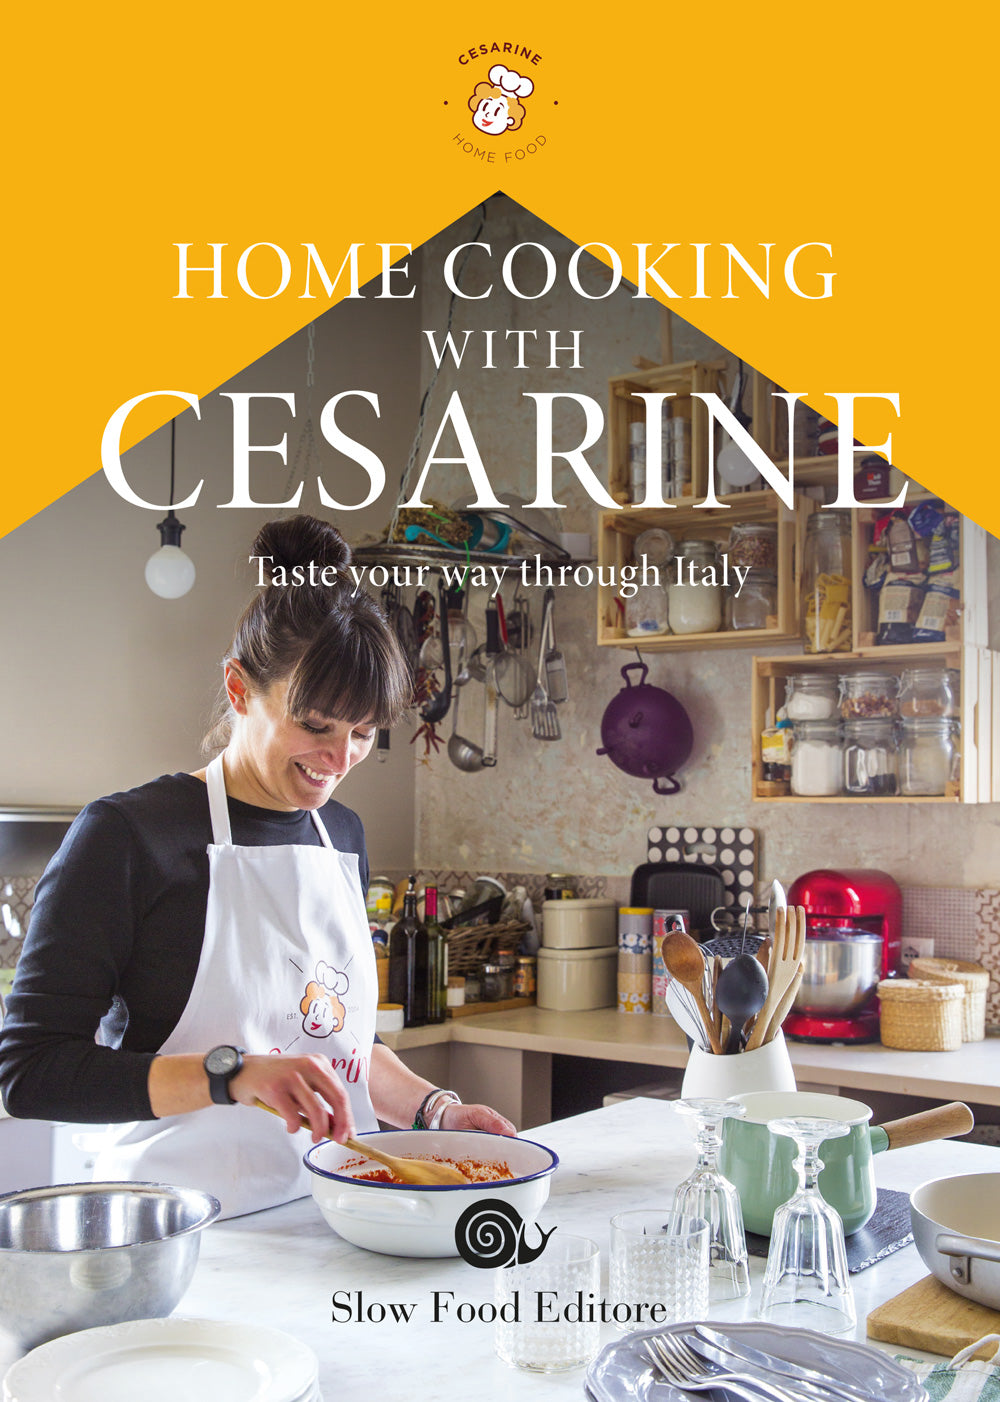 Home cooking with Cesarine::Taste your way through Italy